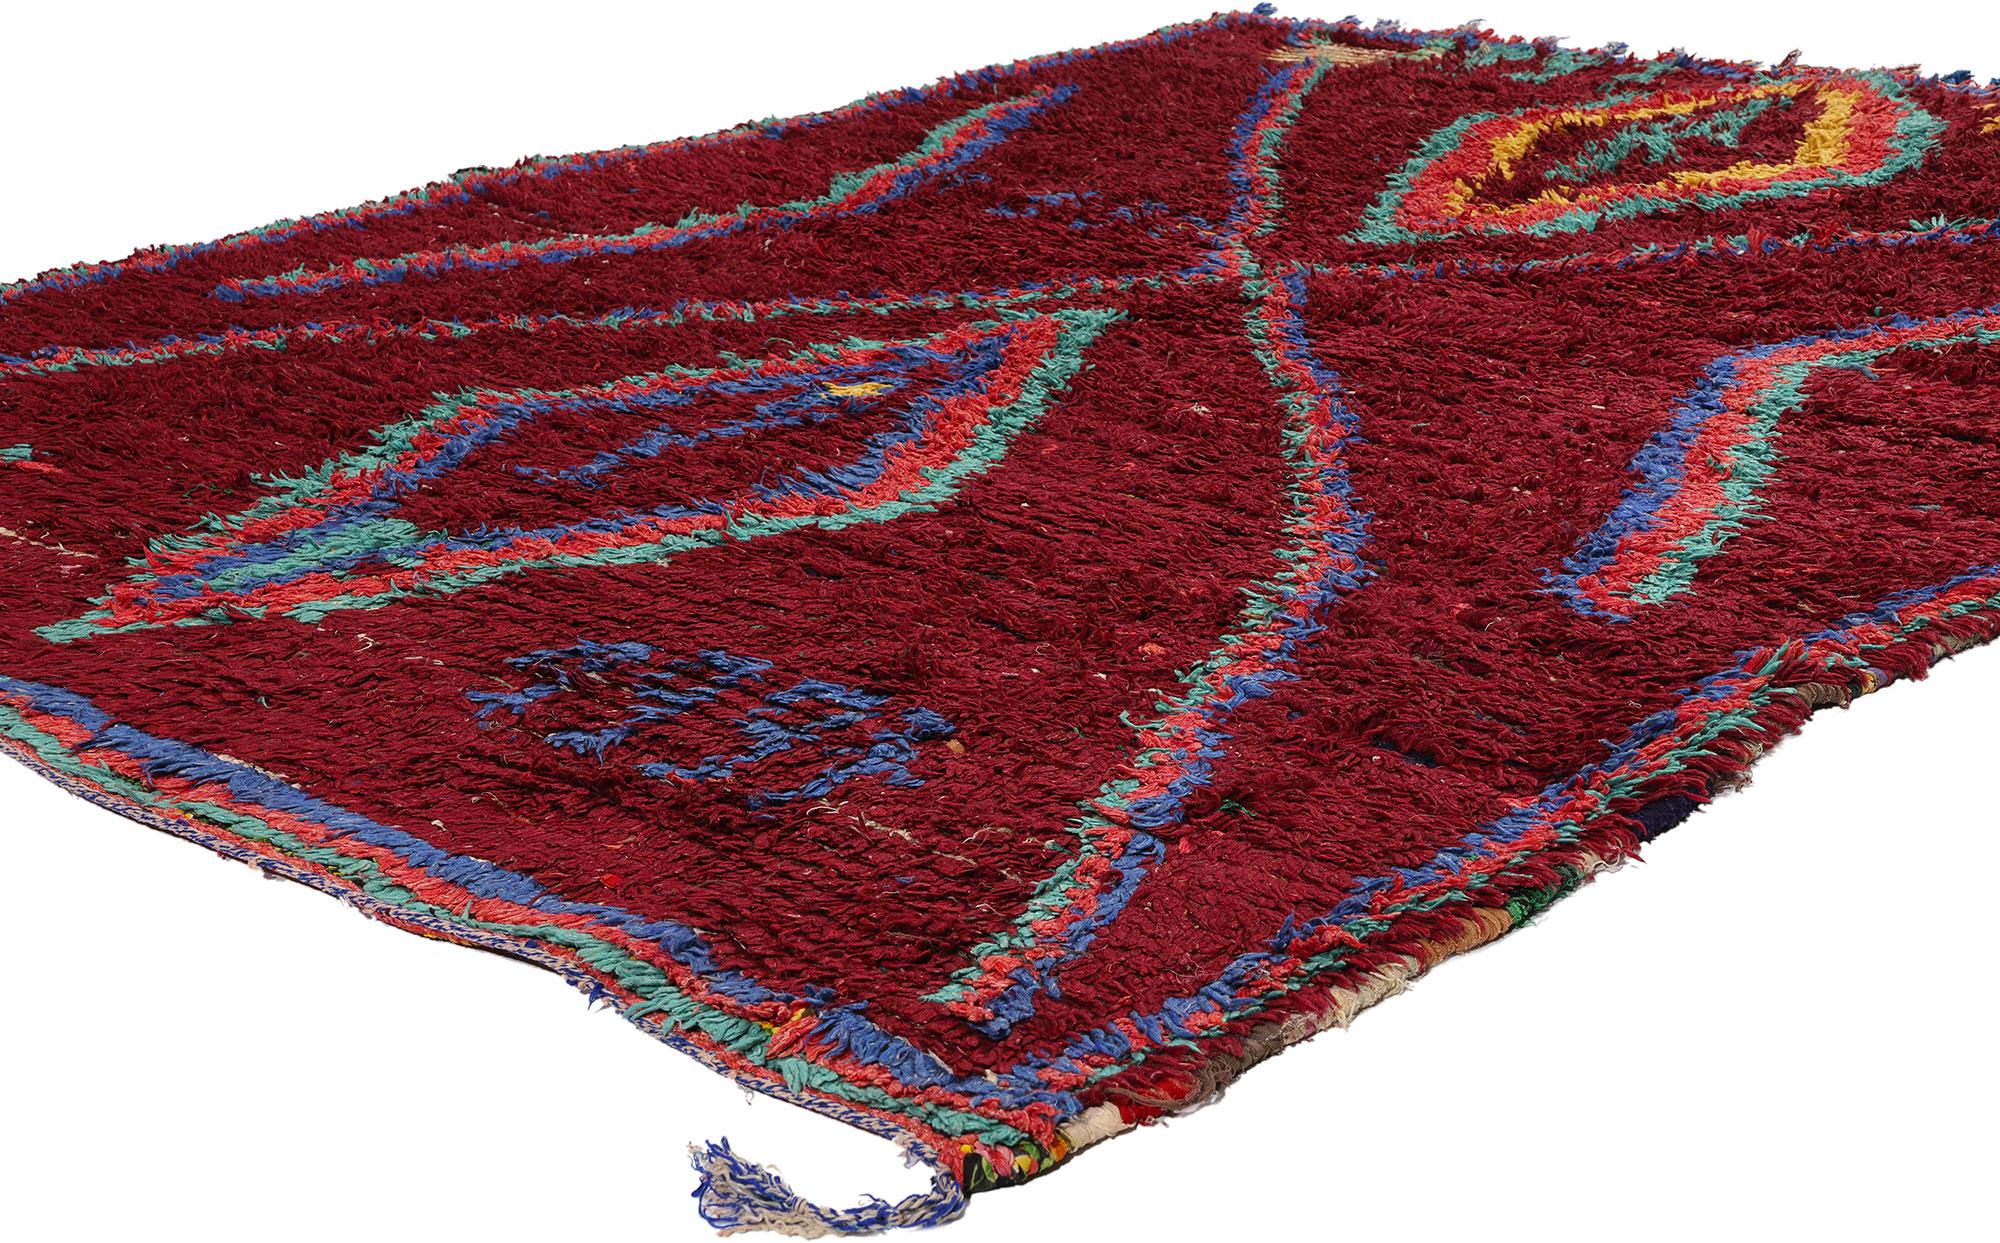 21820 Vintage Boucherouite Boujad Moroccan Rag Rug, 05'04 x 07'00. Immerse yourself in the vibrant essence of Boujad Boucherouite rugs, originating from the dynamic city of Boujad in the Khouribga region. These Moroccan rugs are renowned for their